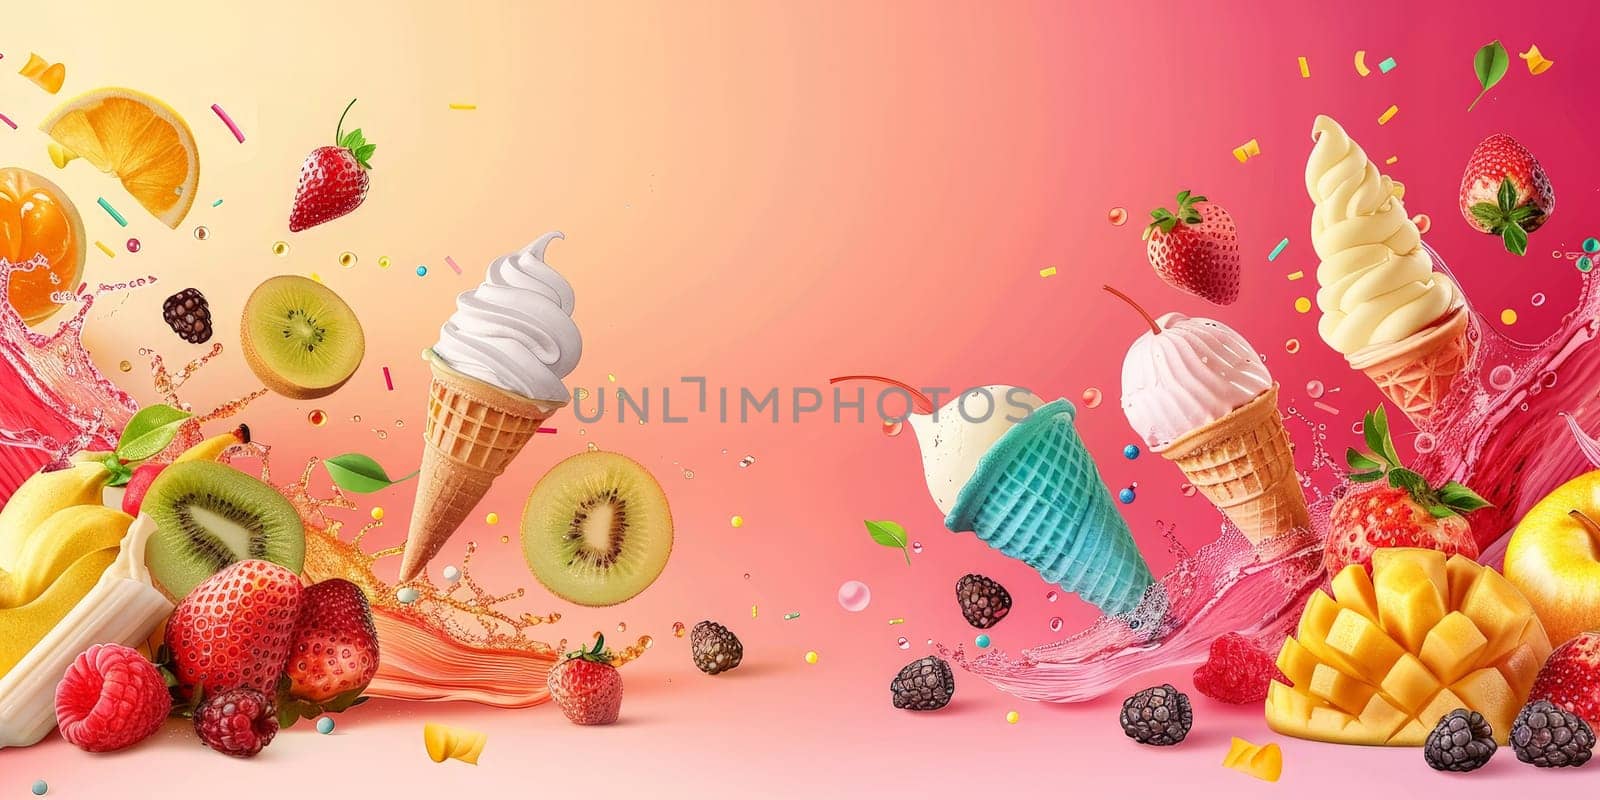 A colorful background with ice cream and fruit on it